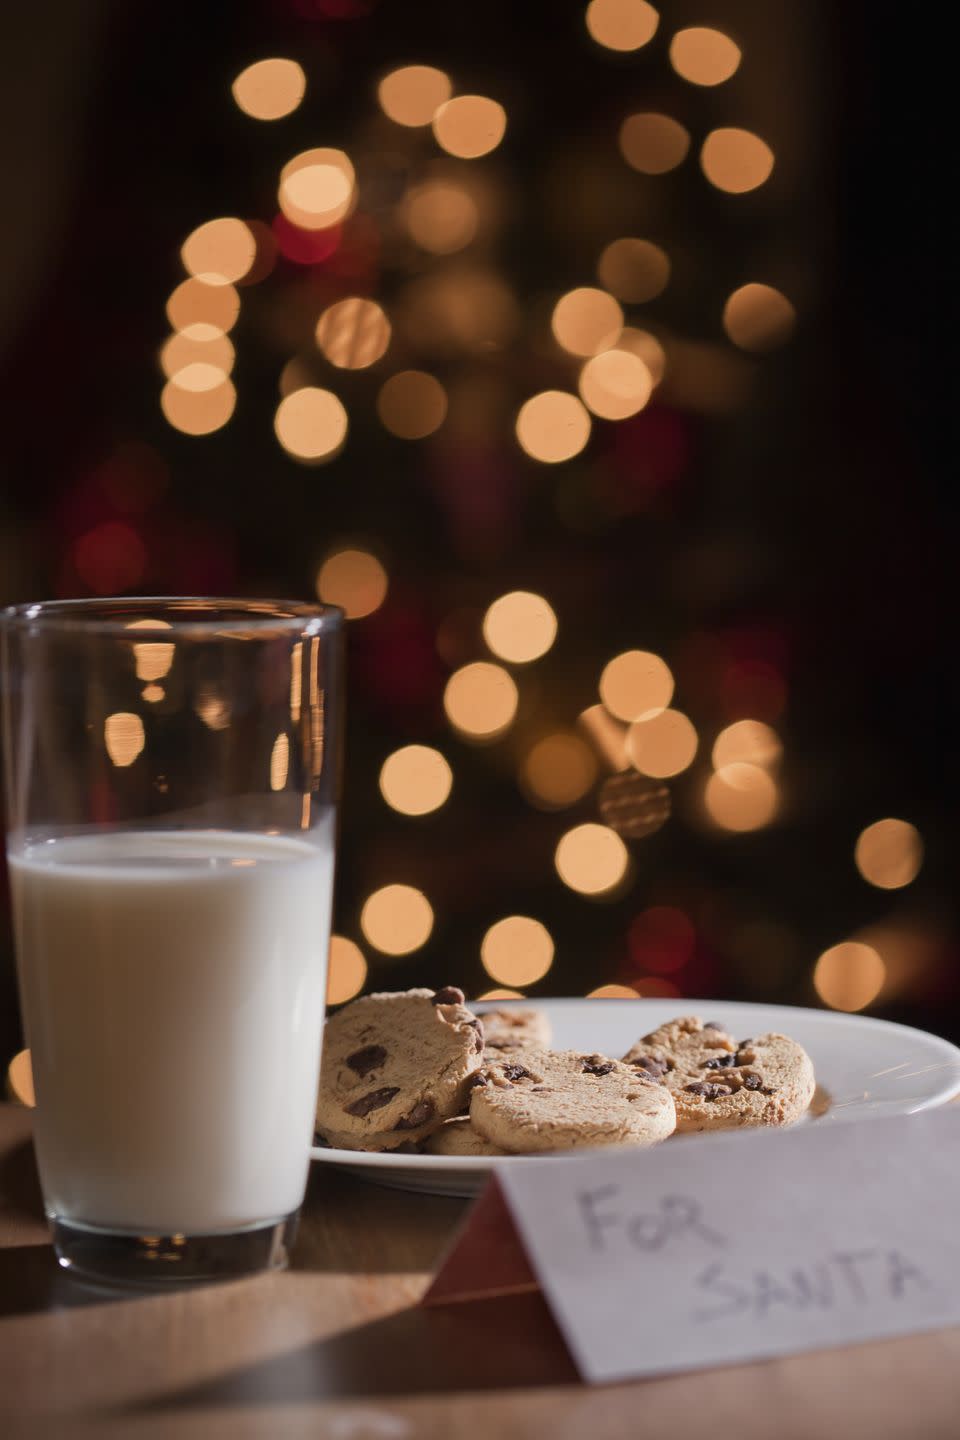 glass of milk and plate of cookies for santa